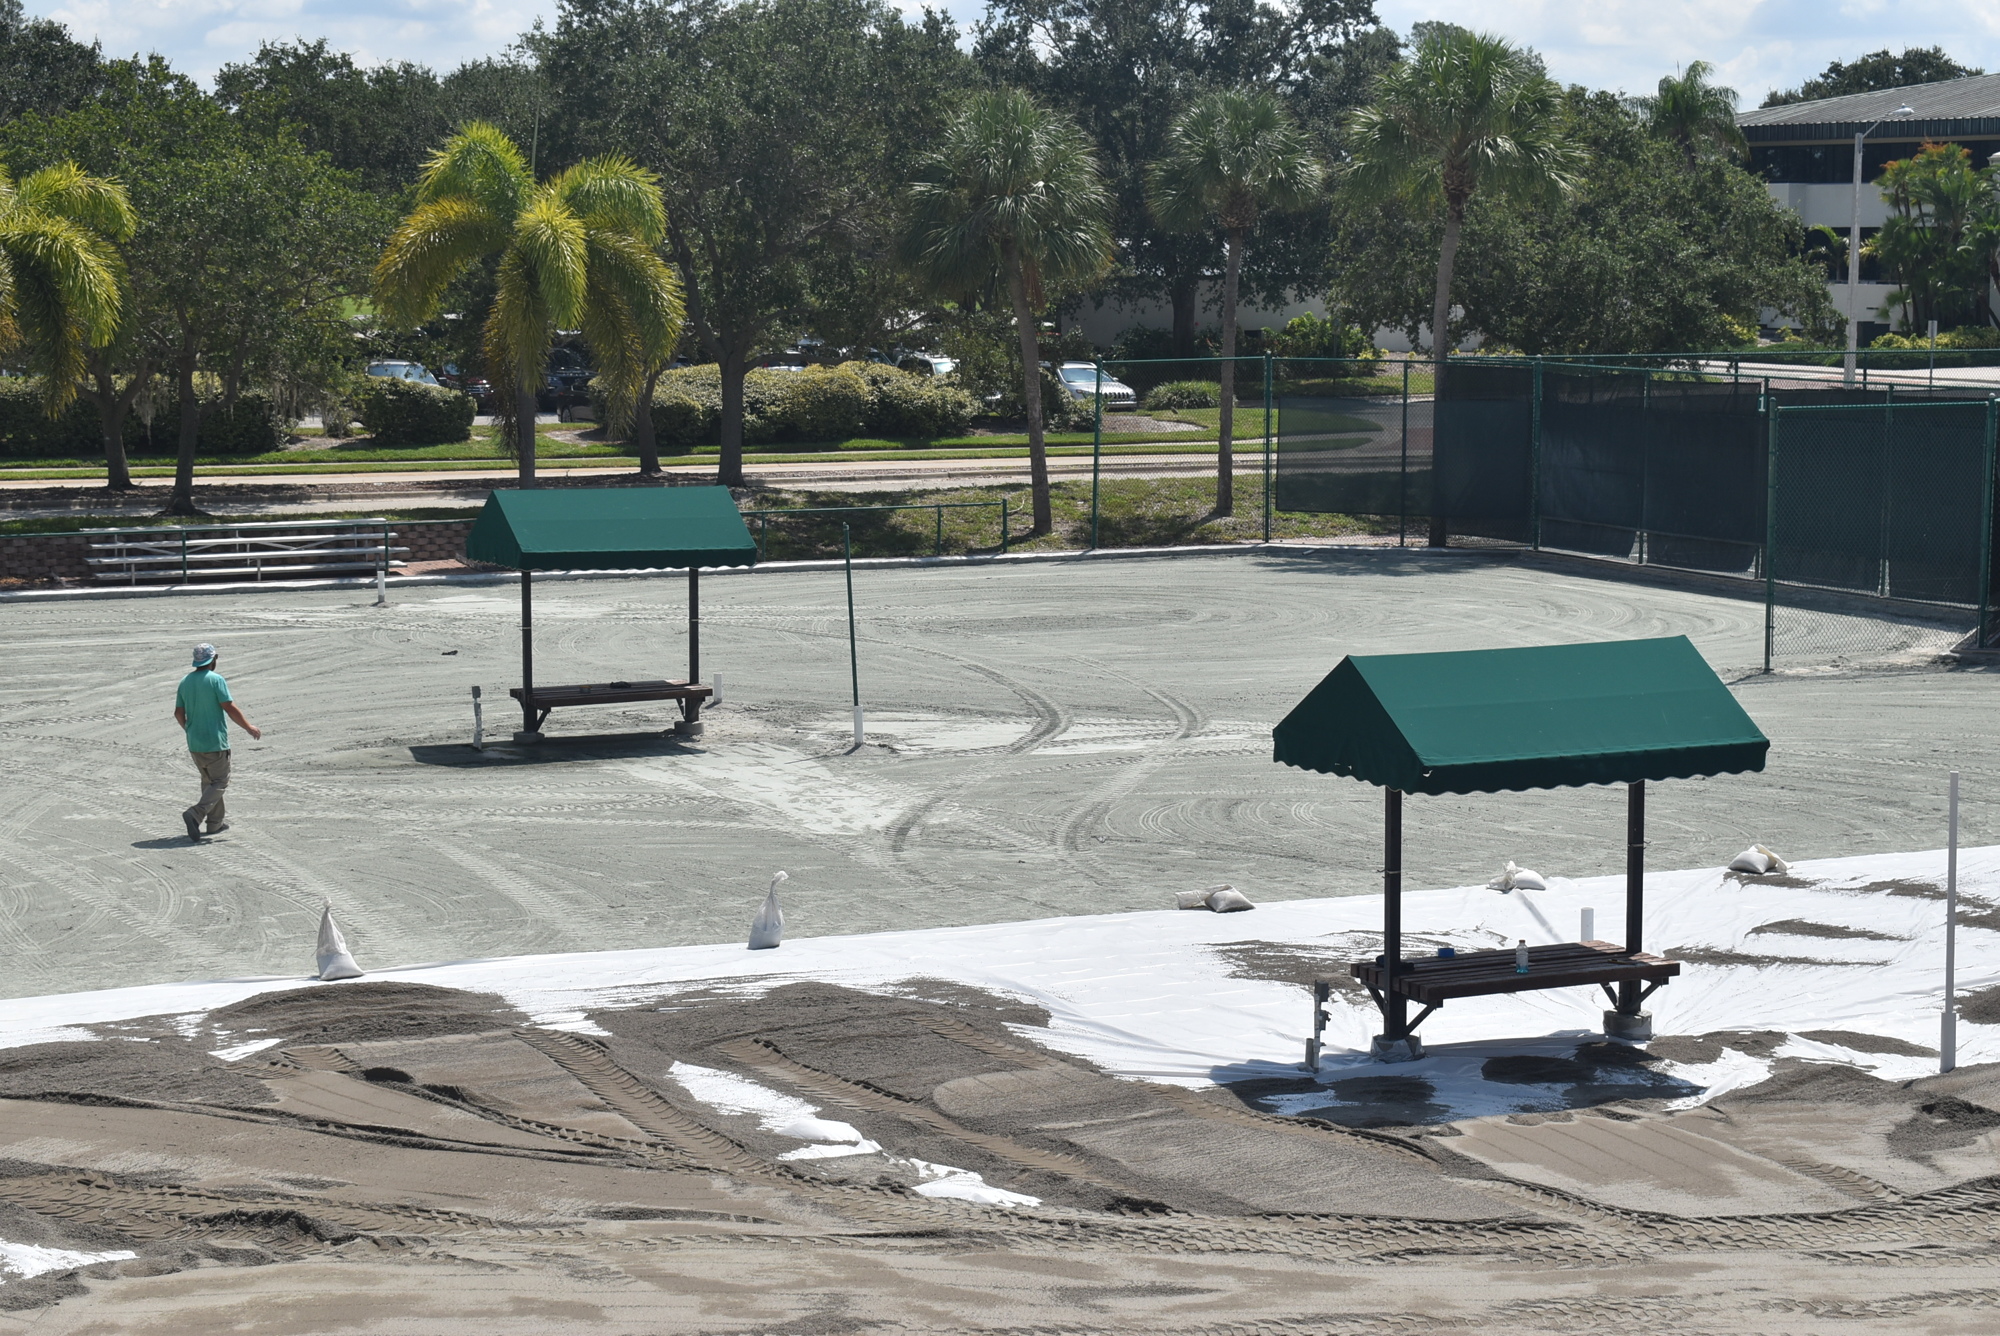 Some of the tennis center courts are looking a bit different at the moment. Photo taken Aug. 29, 2019.